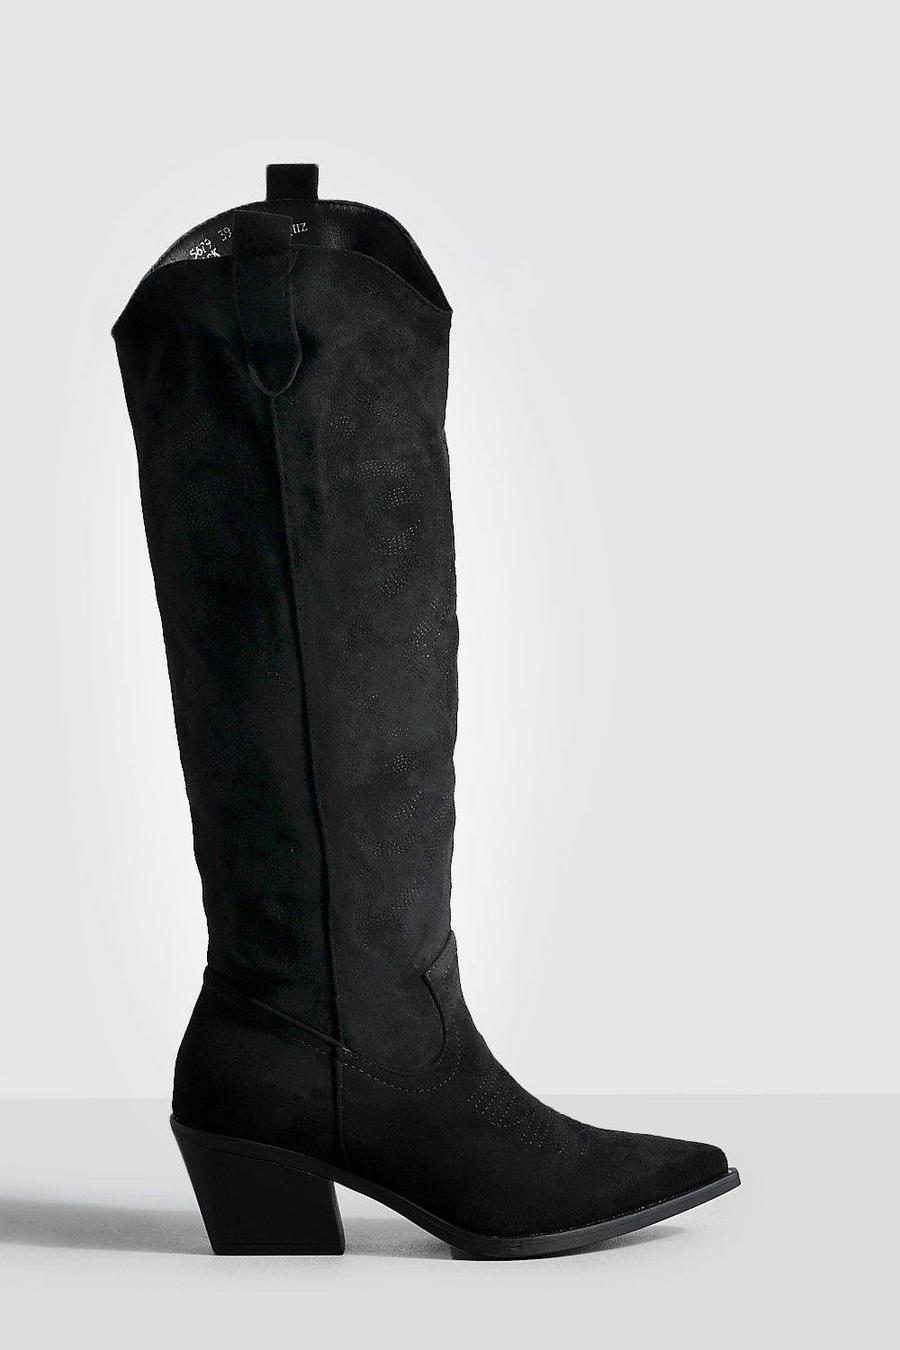 Black Low Heel Embroidered Knee High Western Cowboy Boots